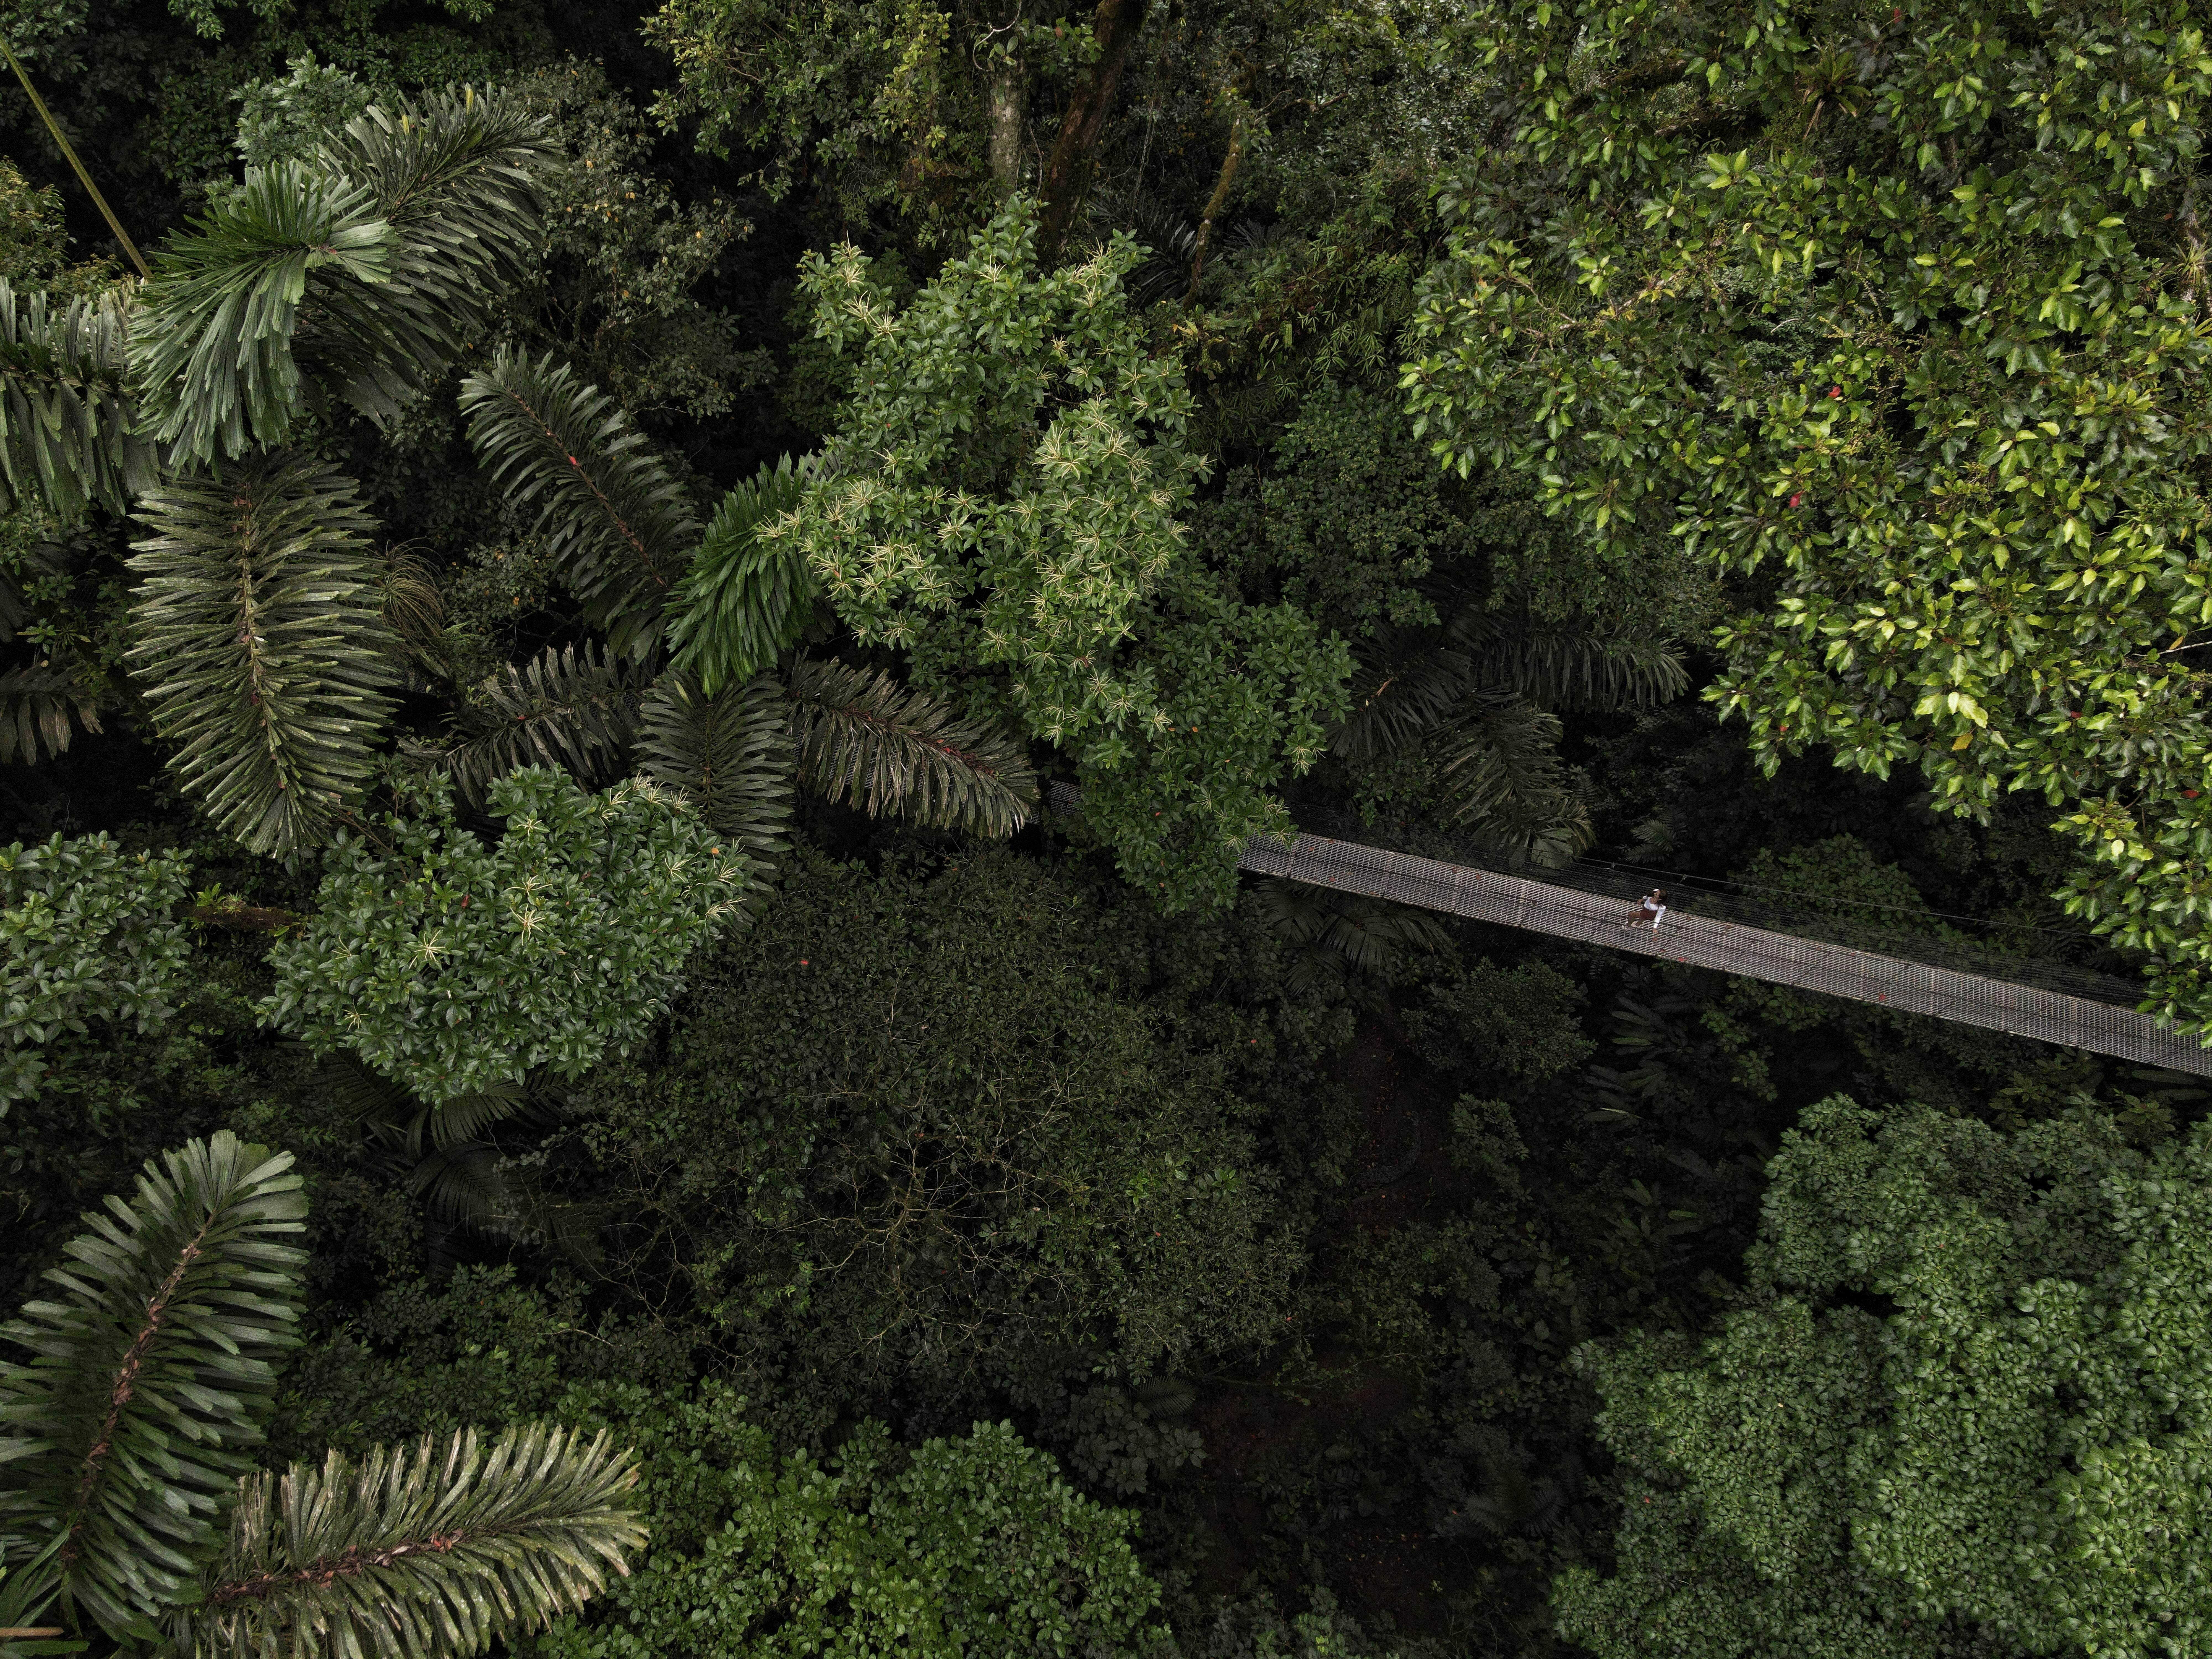 Tropical forest in Costa Rica, home to Hanging Bridges and source of oxygen